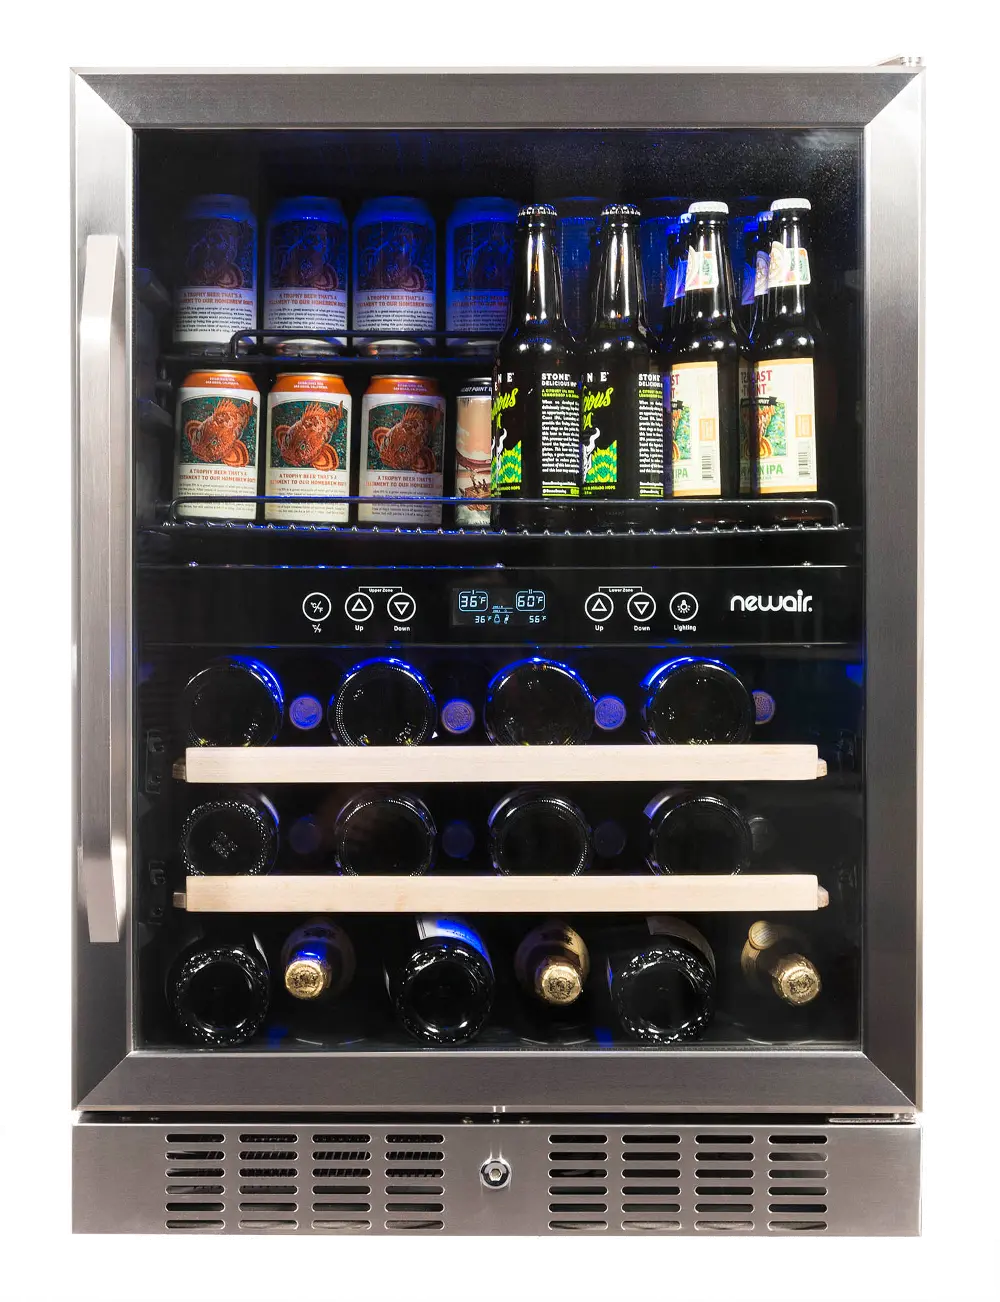 AWB-400DB NewAir Dual Zone Beverage and Wine Cooler - Stainless Steel-1